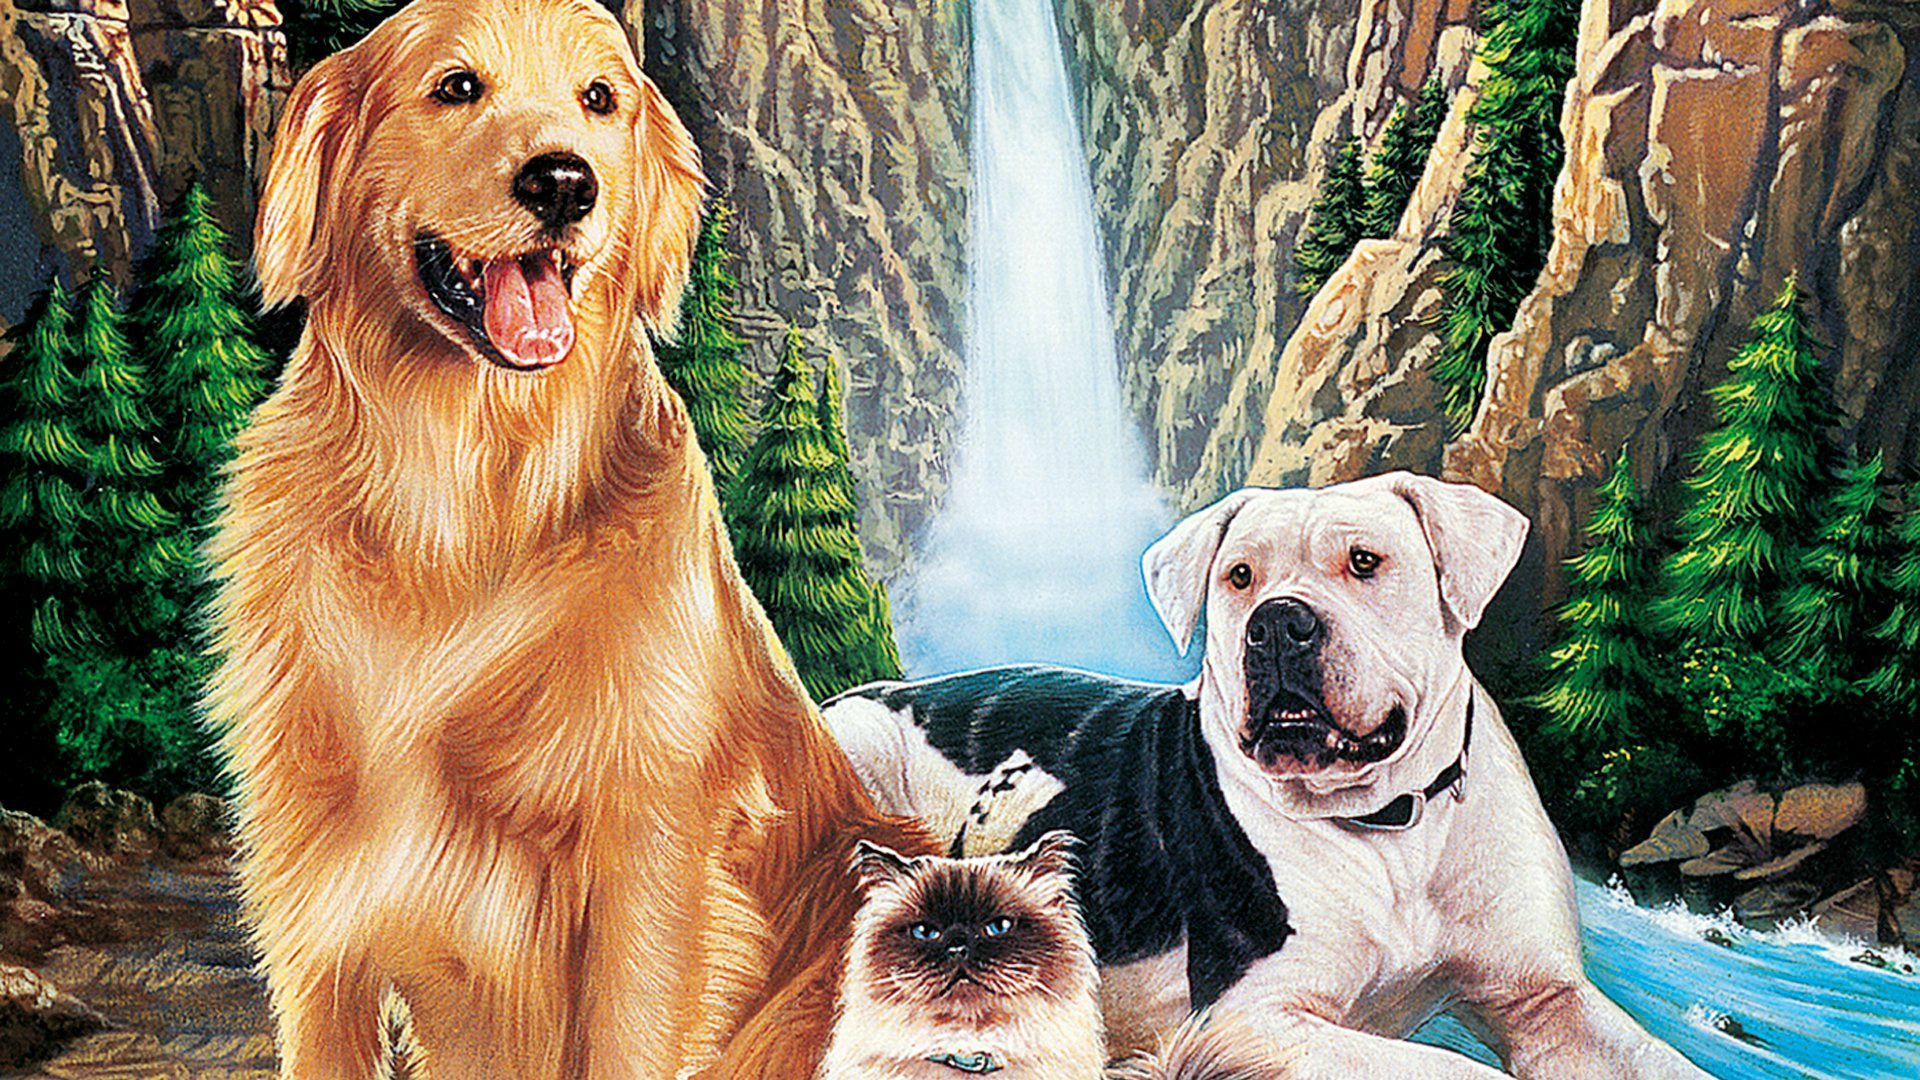 Homeward Bound: The Incredible Journey background